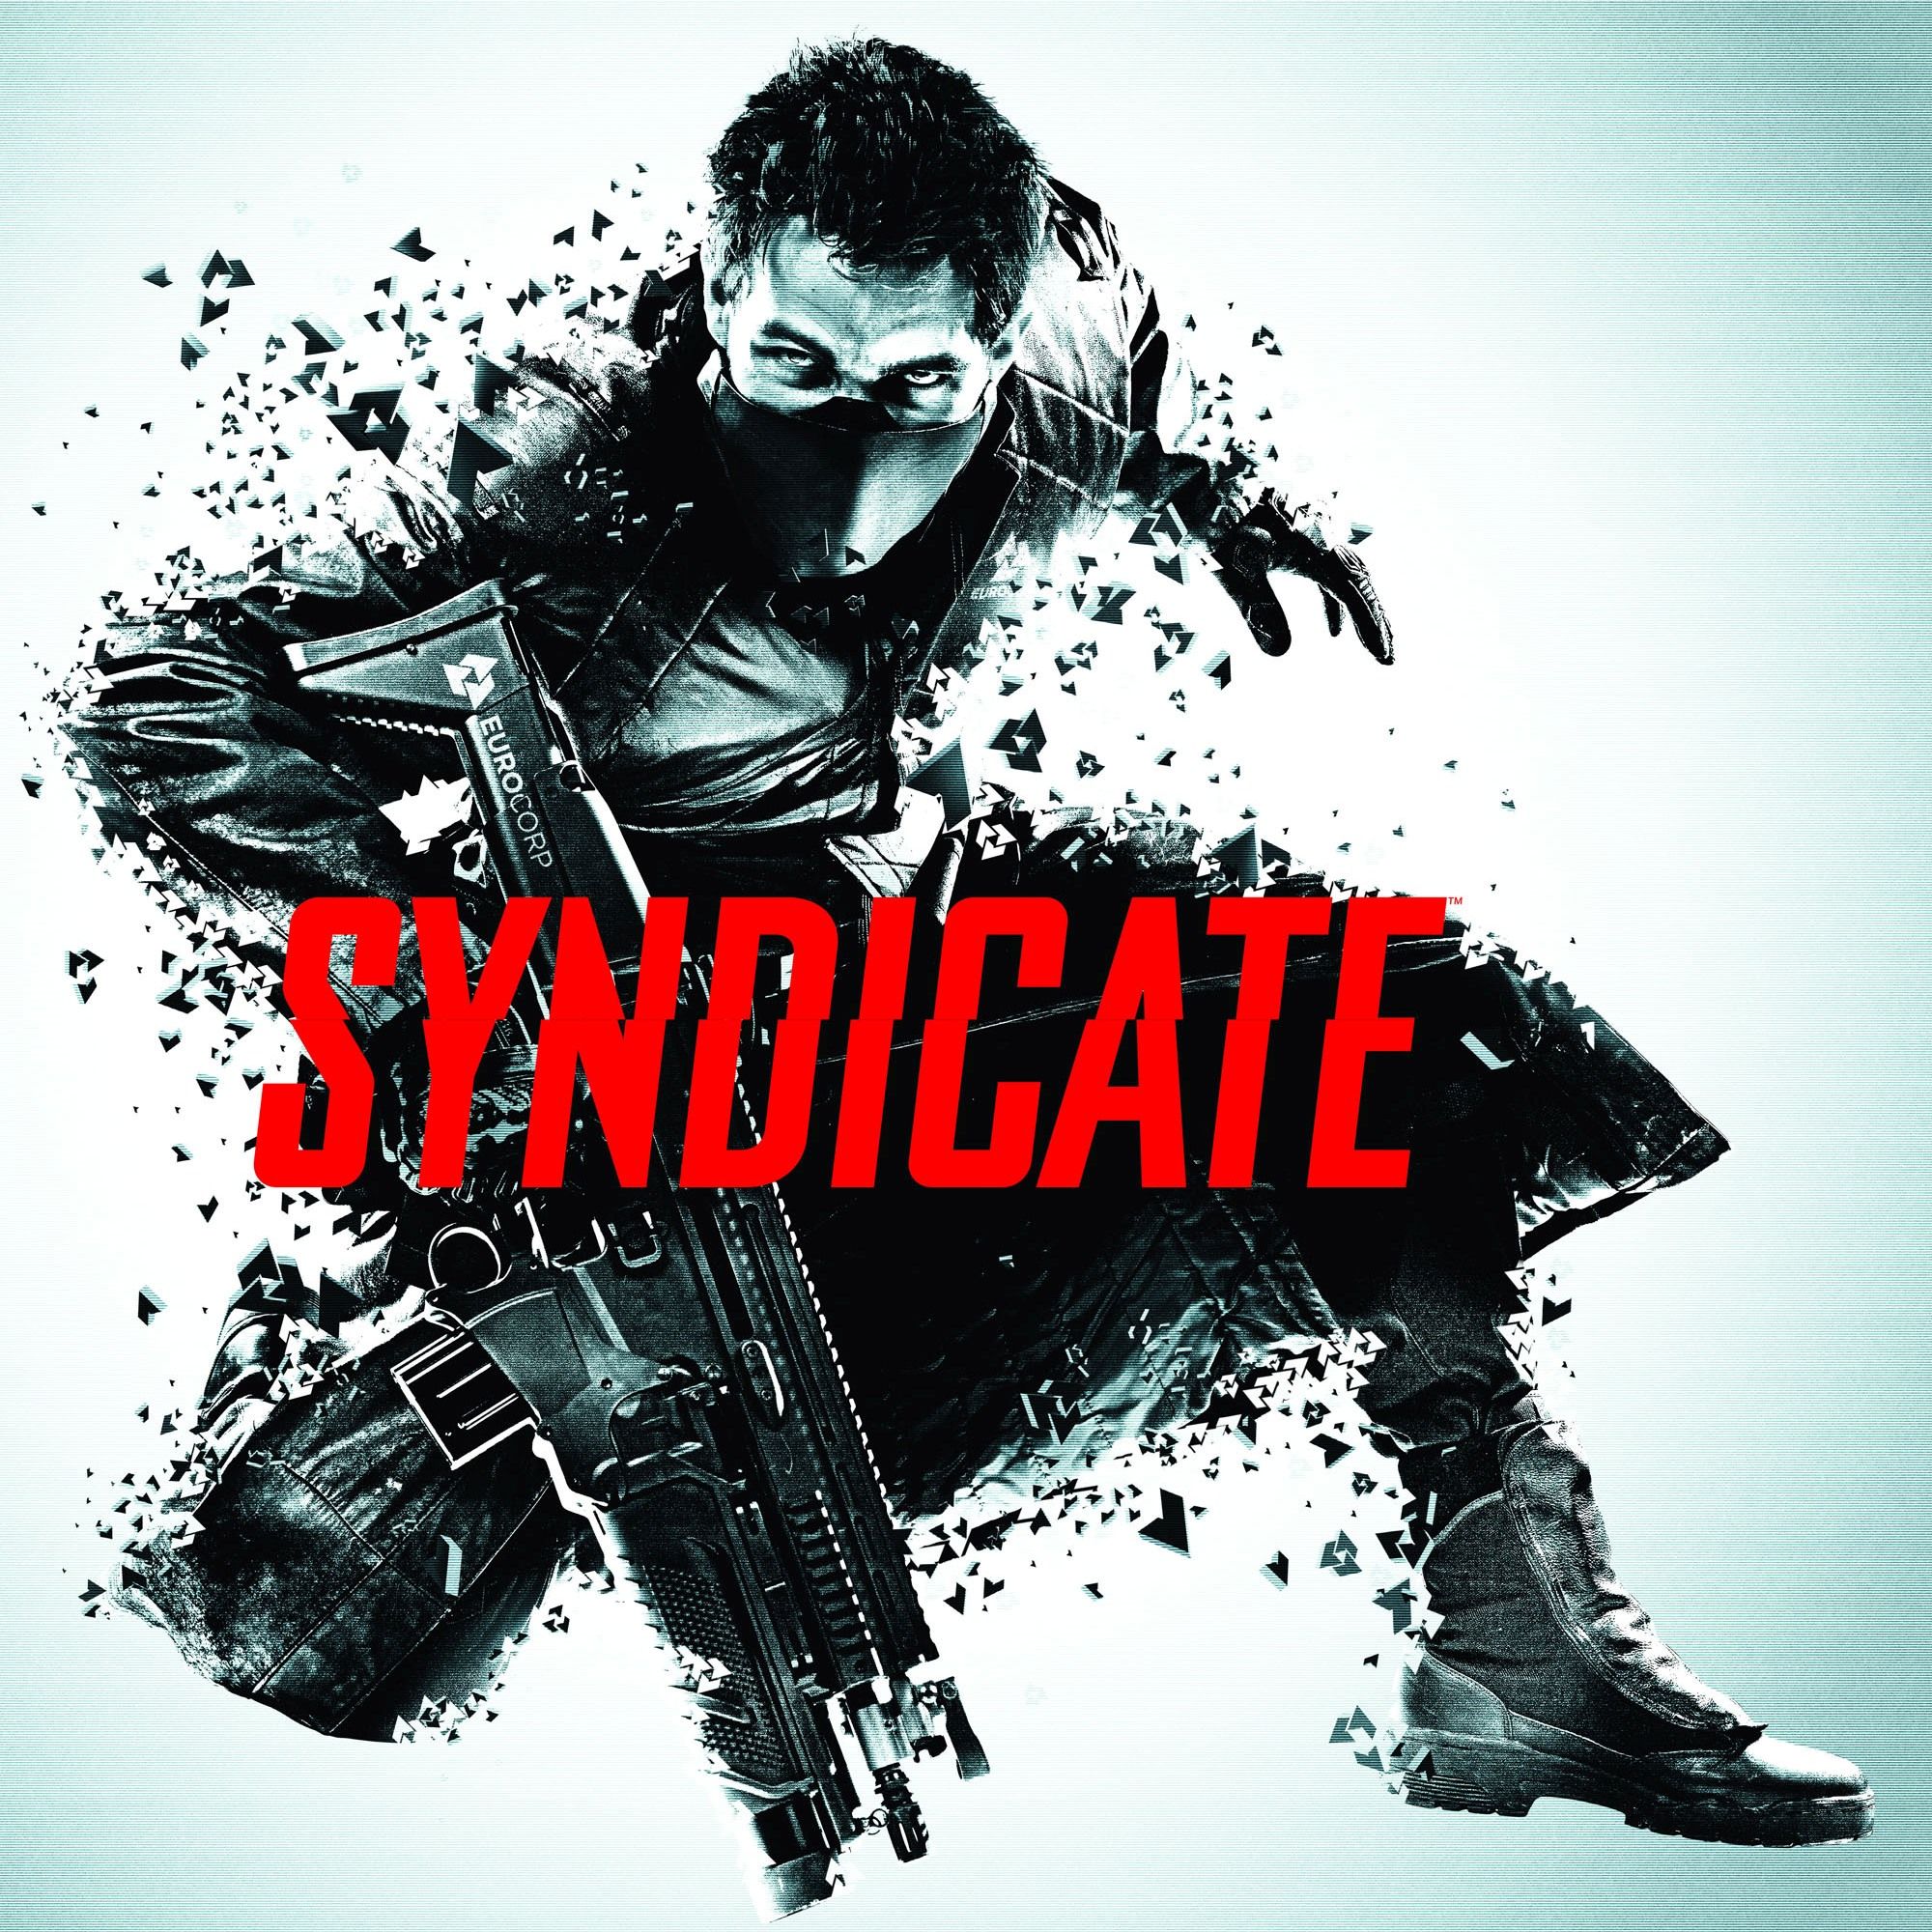 syndicate wallpaper,album cover,poster,music,graphic design,font